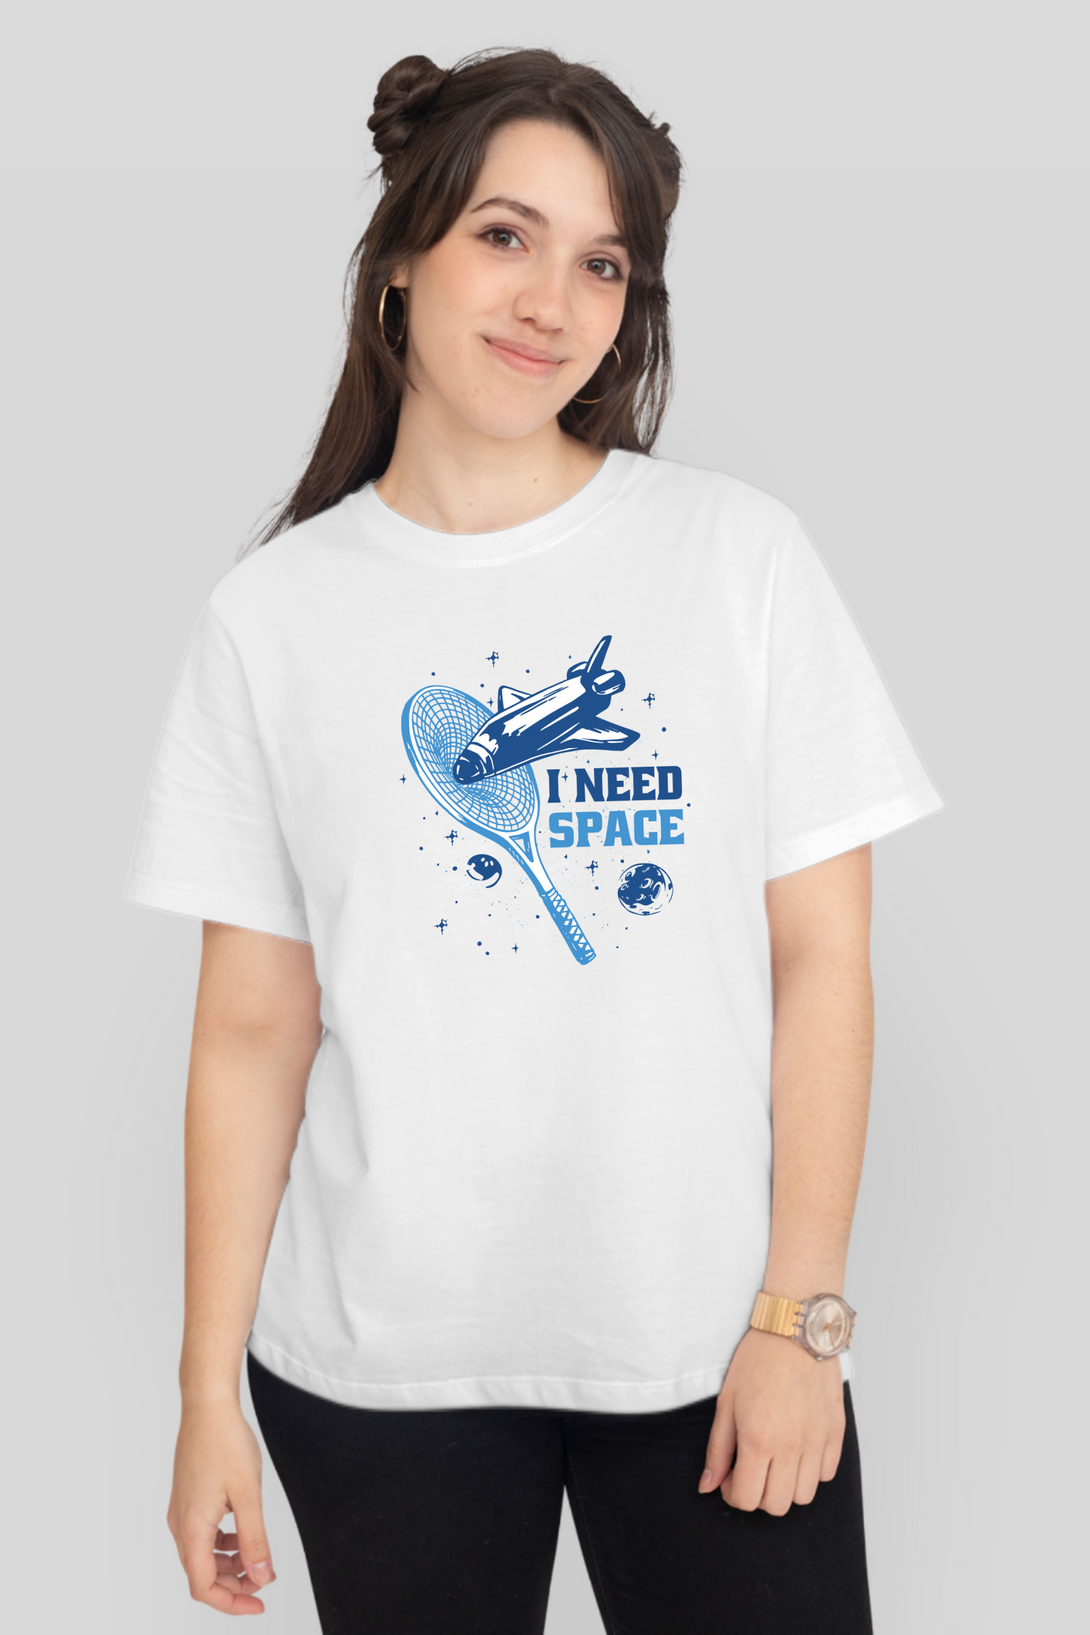 I Need Space Printed T-Shirt For Women - WowWaves - 10